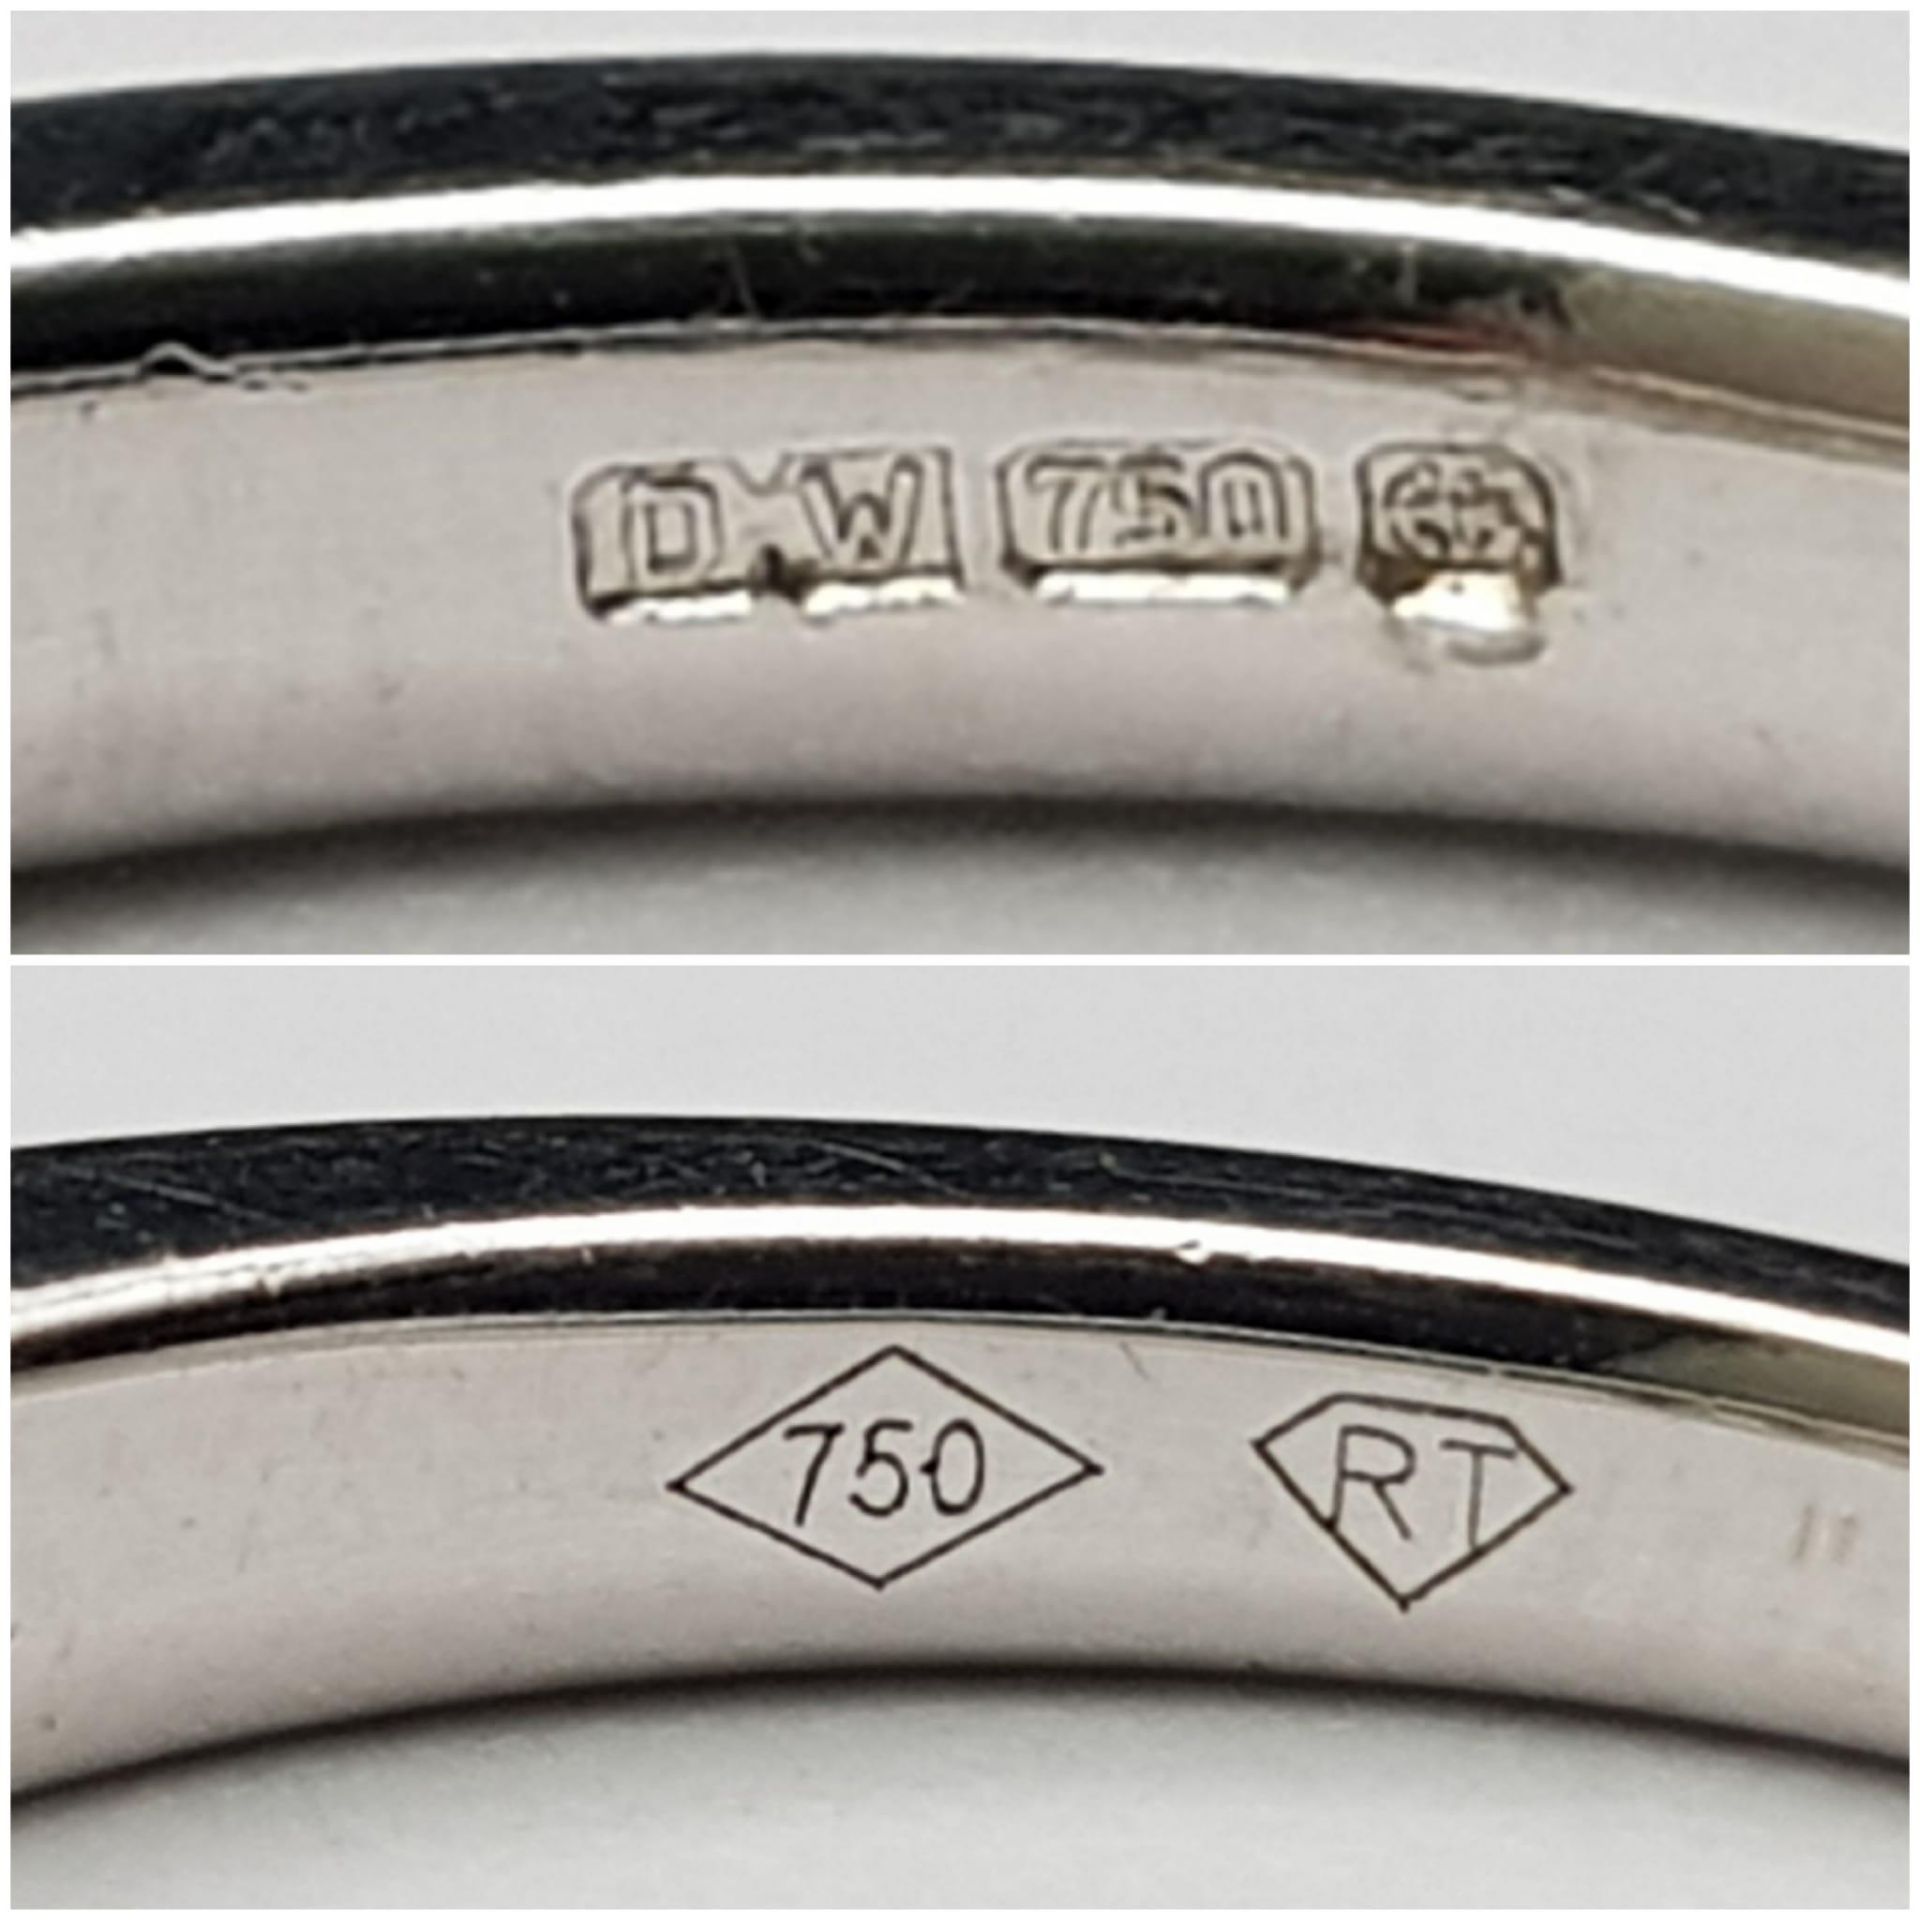 AN 18K WHITE GOLD DIAMOND 1/2 ETERNITY RING. CHANNEL SET PRINCESS CUTS. 0.35CTW. 2.5G. SIZE M - Image 5 of 5